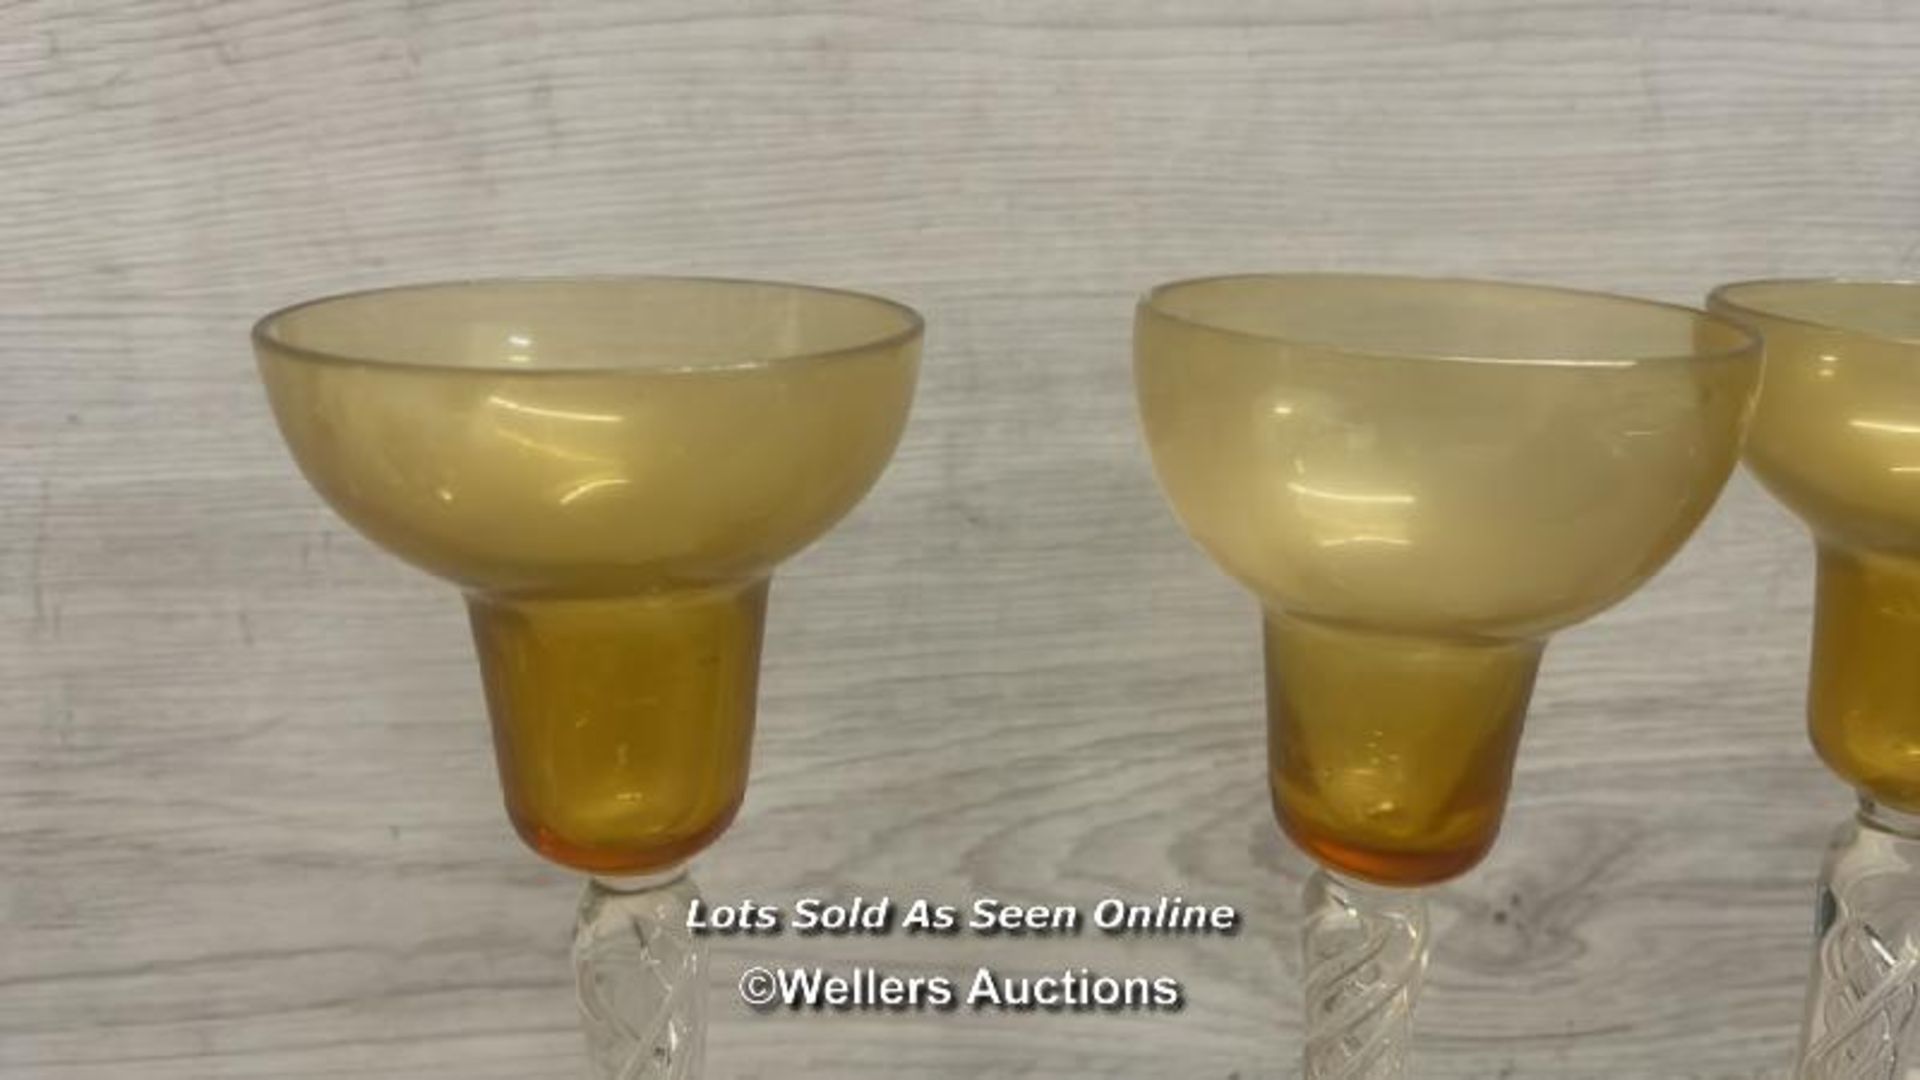 FOUR VINTAGE TWIST STEM CHAMPAGNE GLASSES, IN GOOD CONDITION - Image 3 of 3